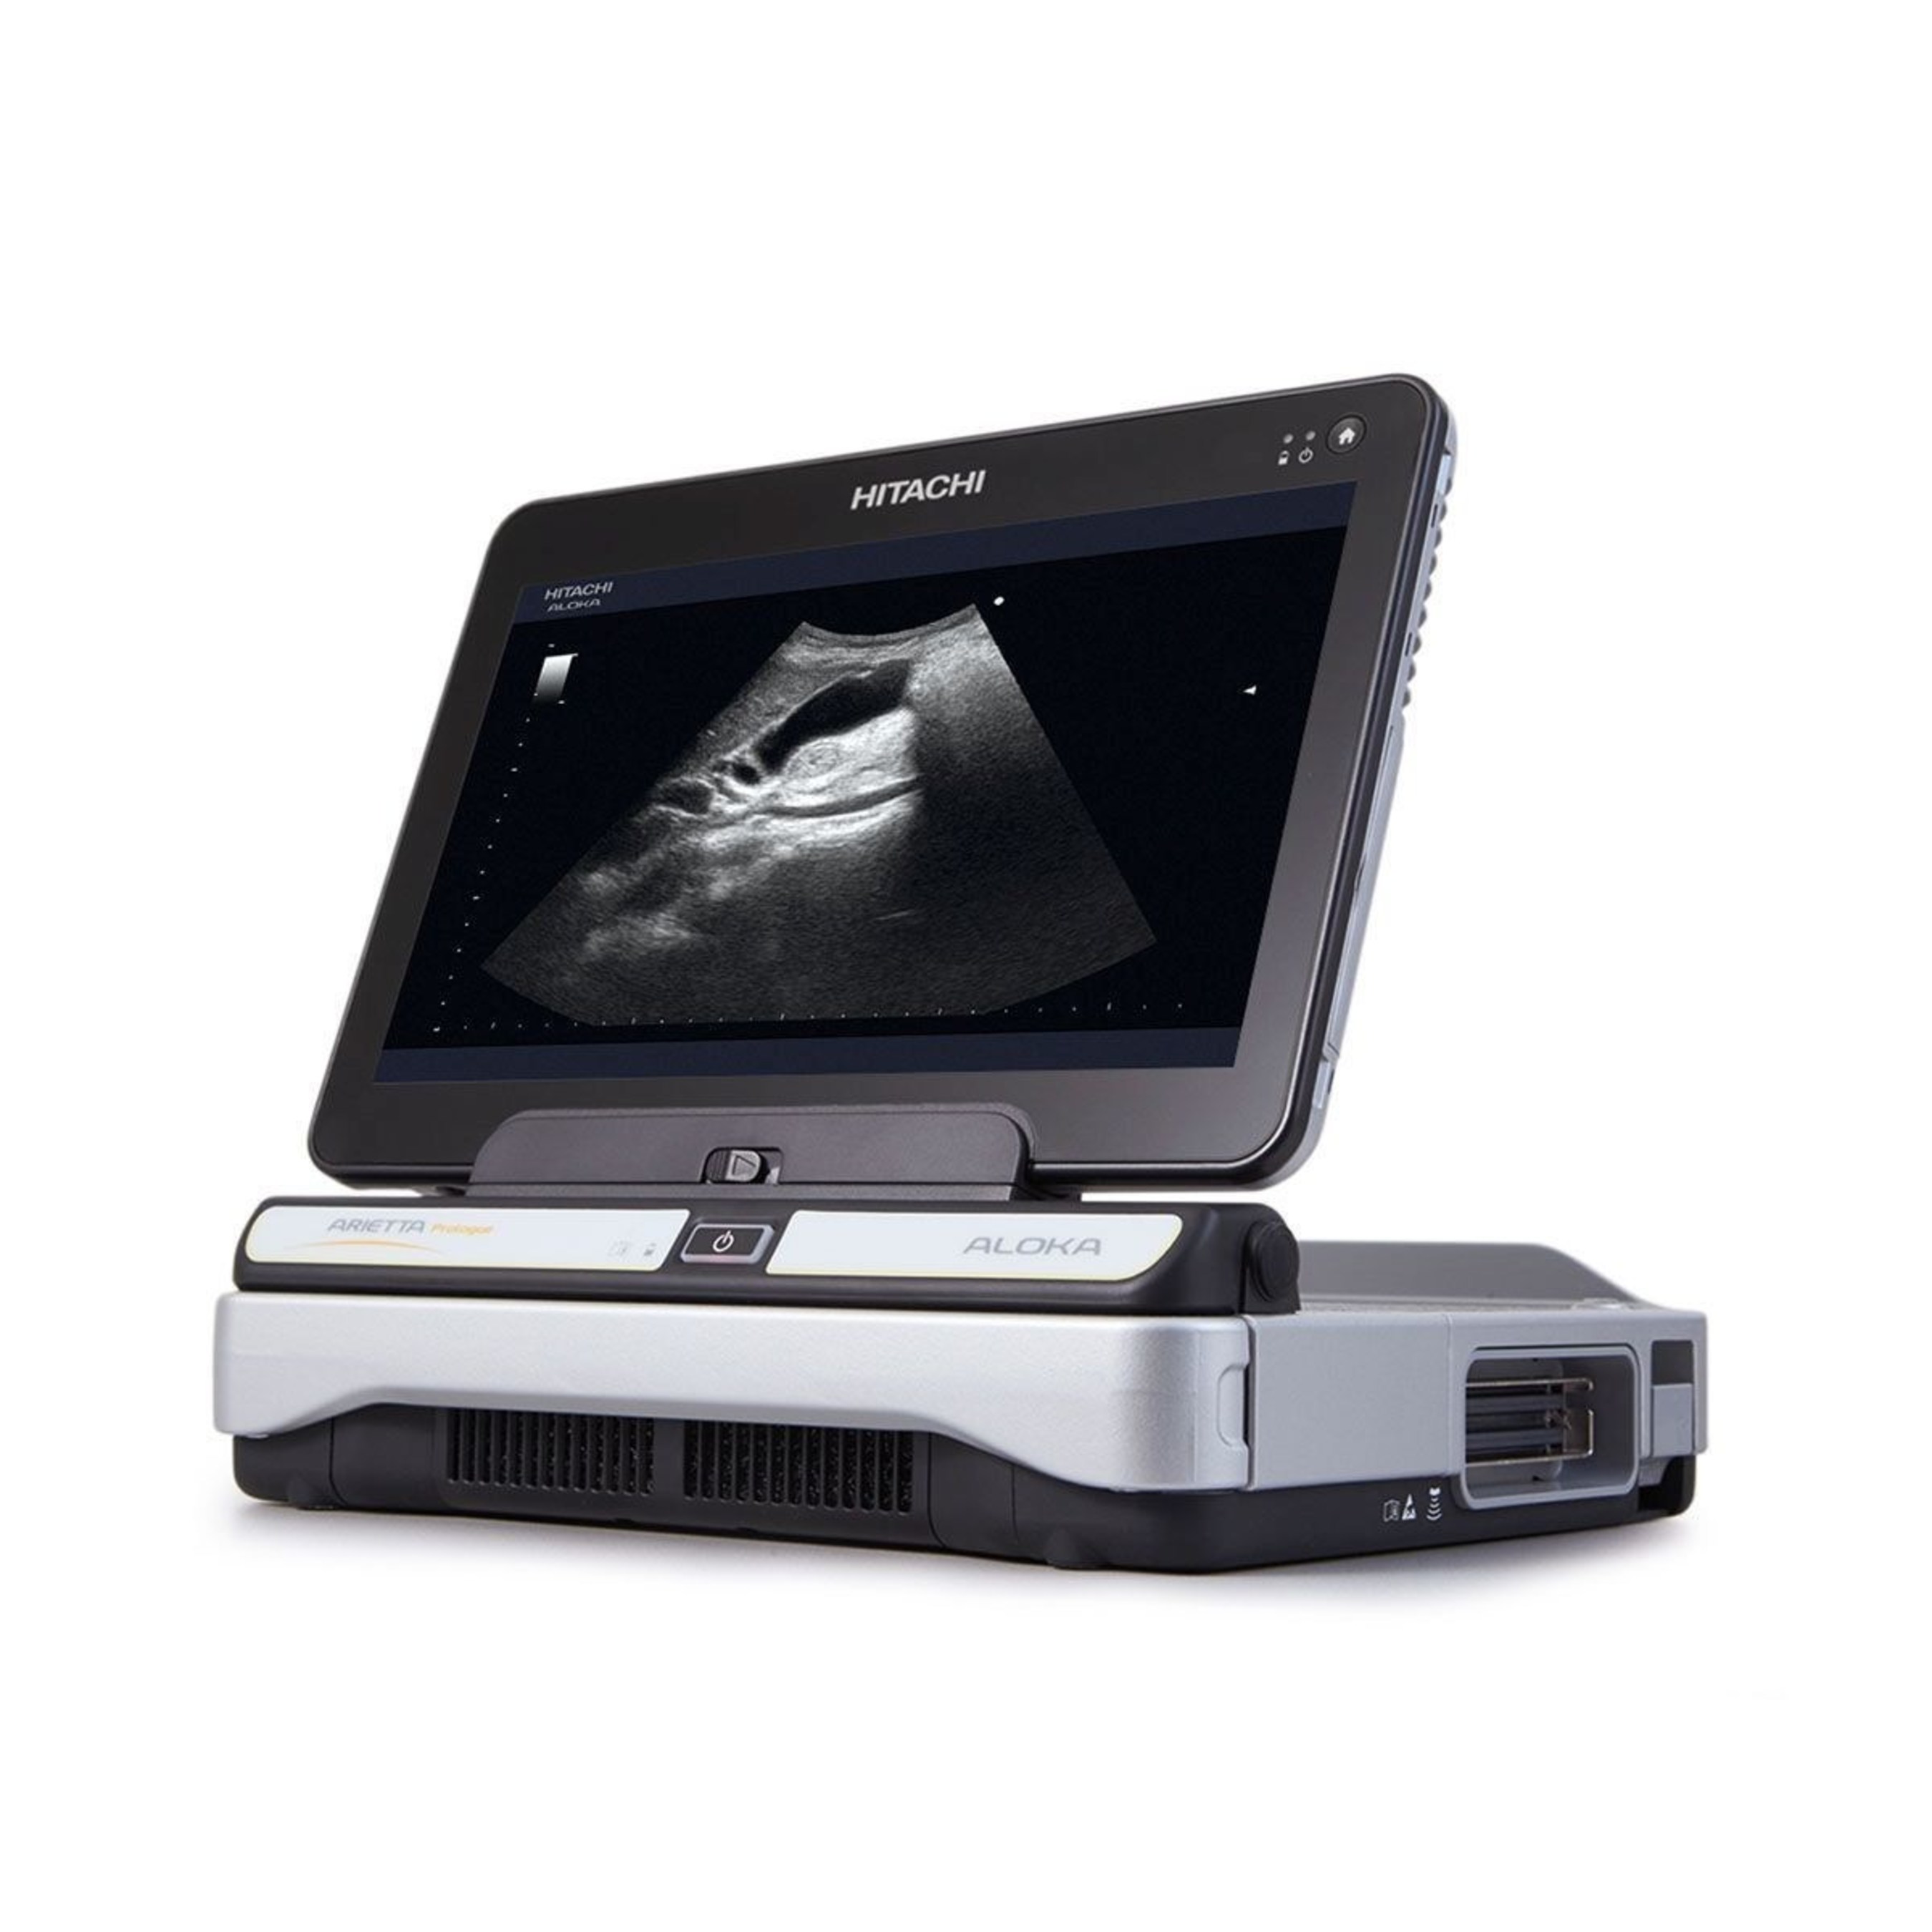 ARIETTA Prologue. Hitachi Aloka launches two new, highly flexible Diagnostic Ultrasound Systems, ARIETTA Precision and ARIETTA Prologue. (PRNewsFoto/Hitachi Medical Systems Europe) (PRNewsFoto/Hitachi Medical Systems Europe)